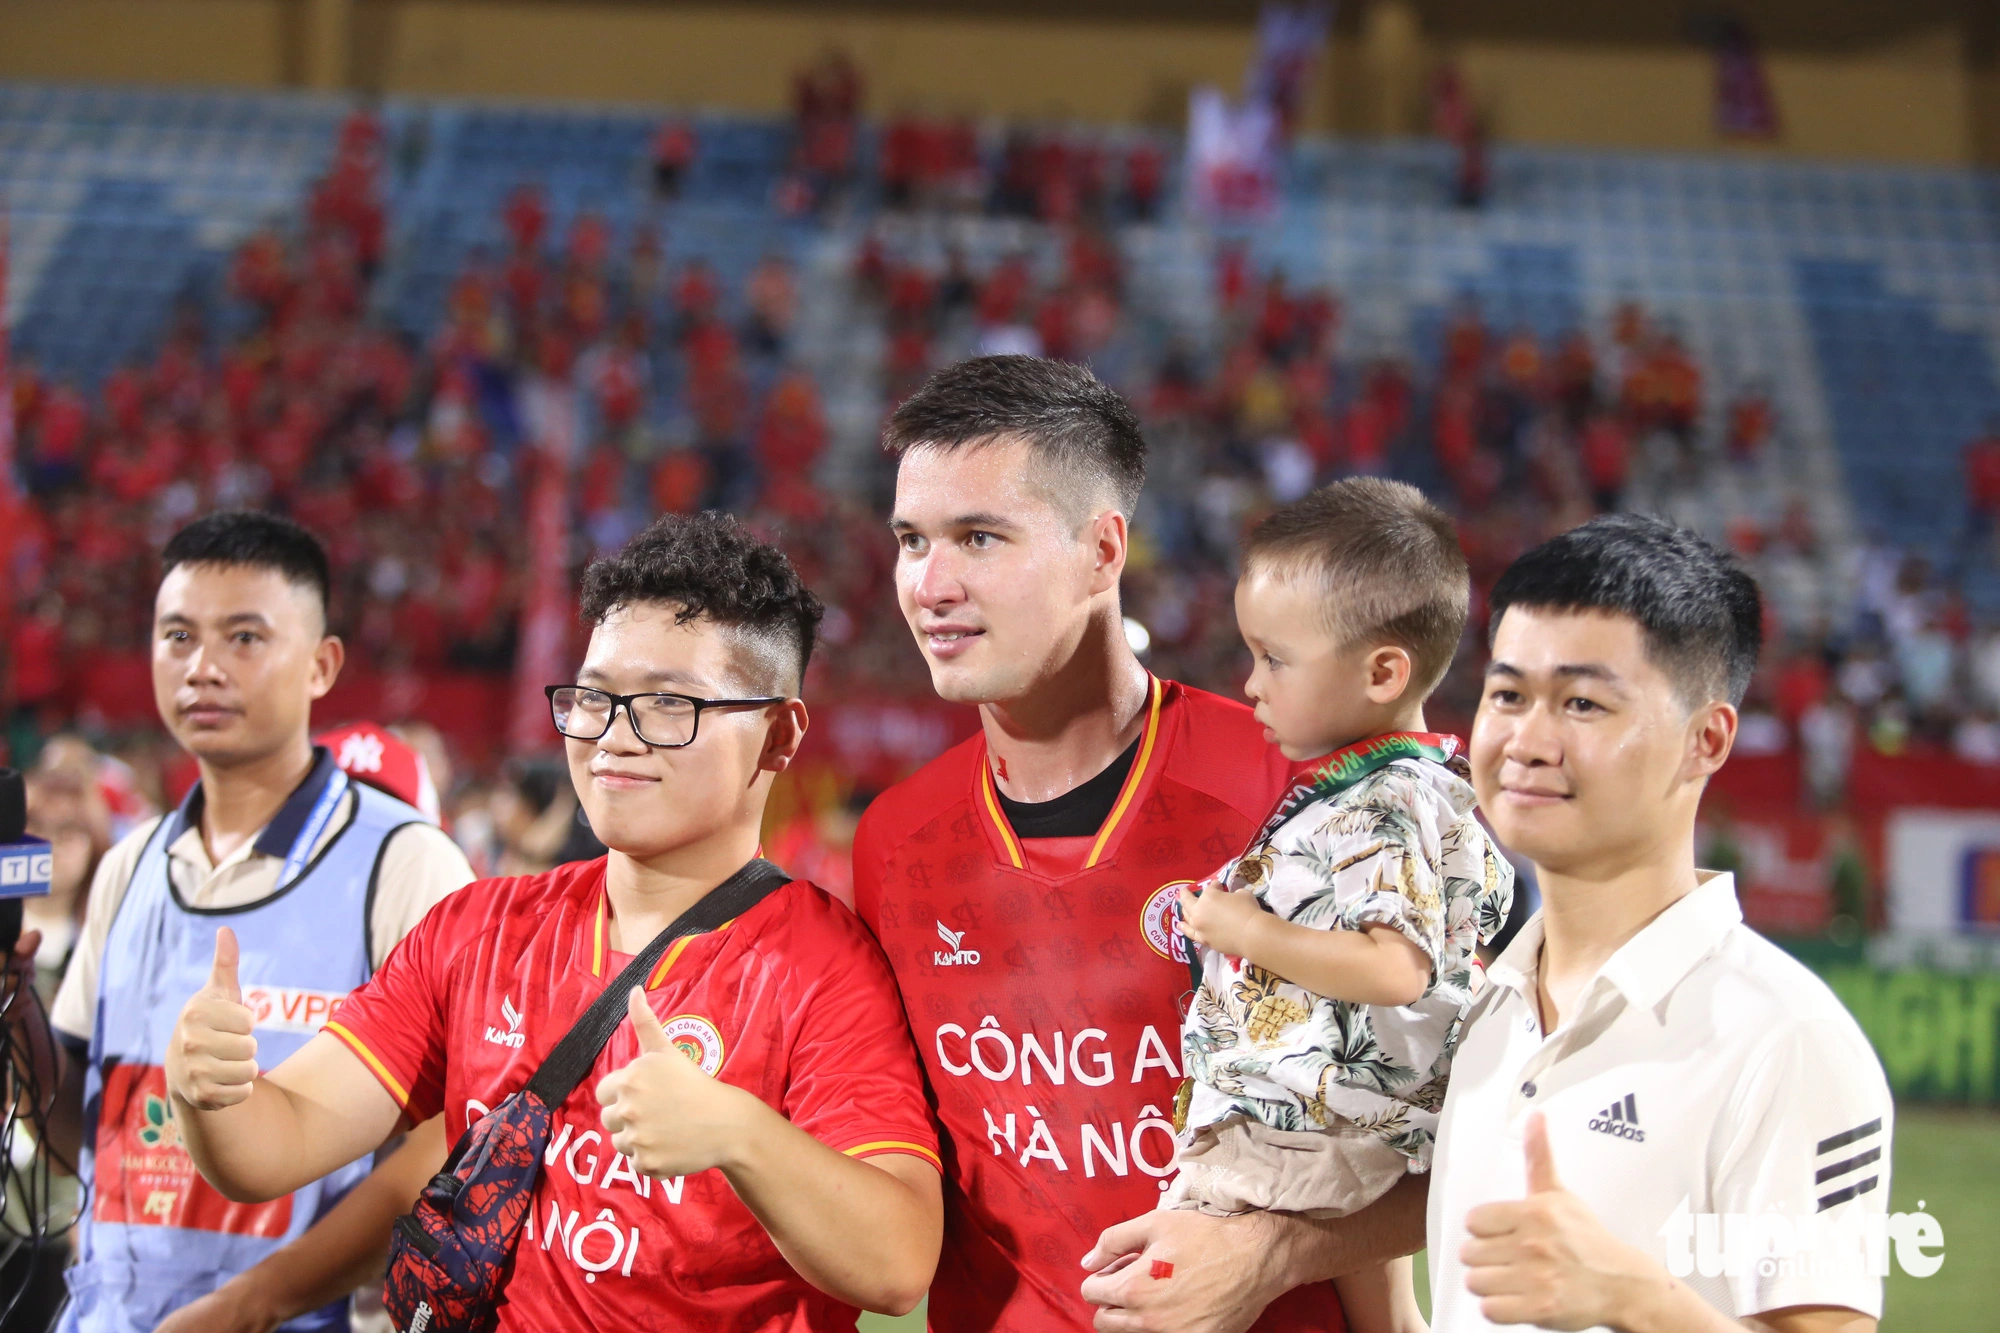 Cong An Hanoi FC’s Filip Nguyen holds his son to take photos with fans after winning the V-League 1 2023 at Hang Day Stadium in Hanoi, August 27, 2023. Photo: Nam Tran / Tuoi Tre